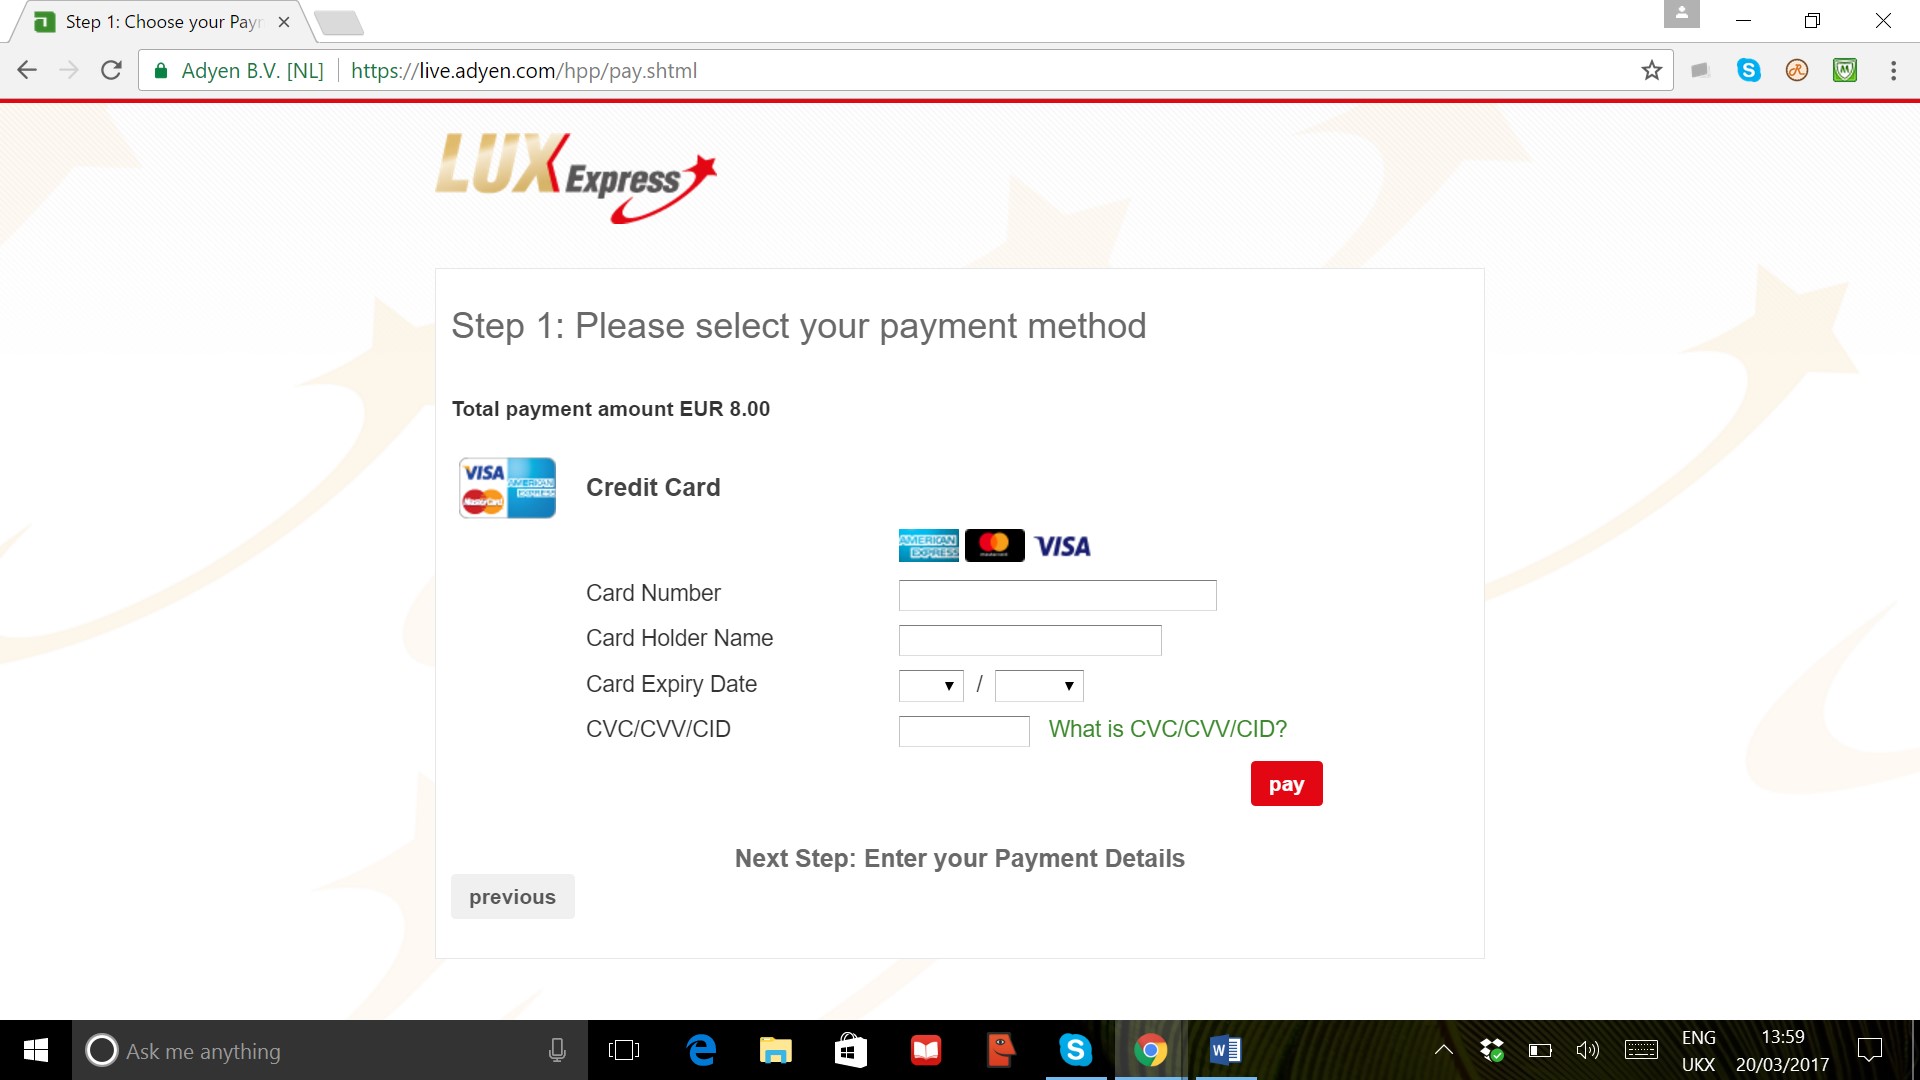 LUX Express Payment Page